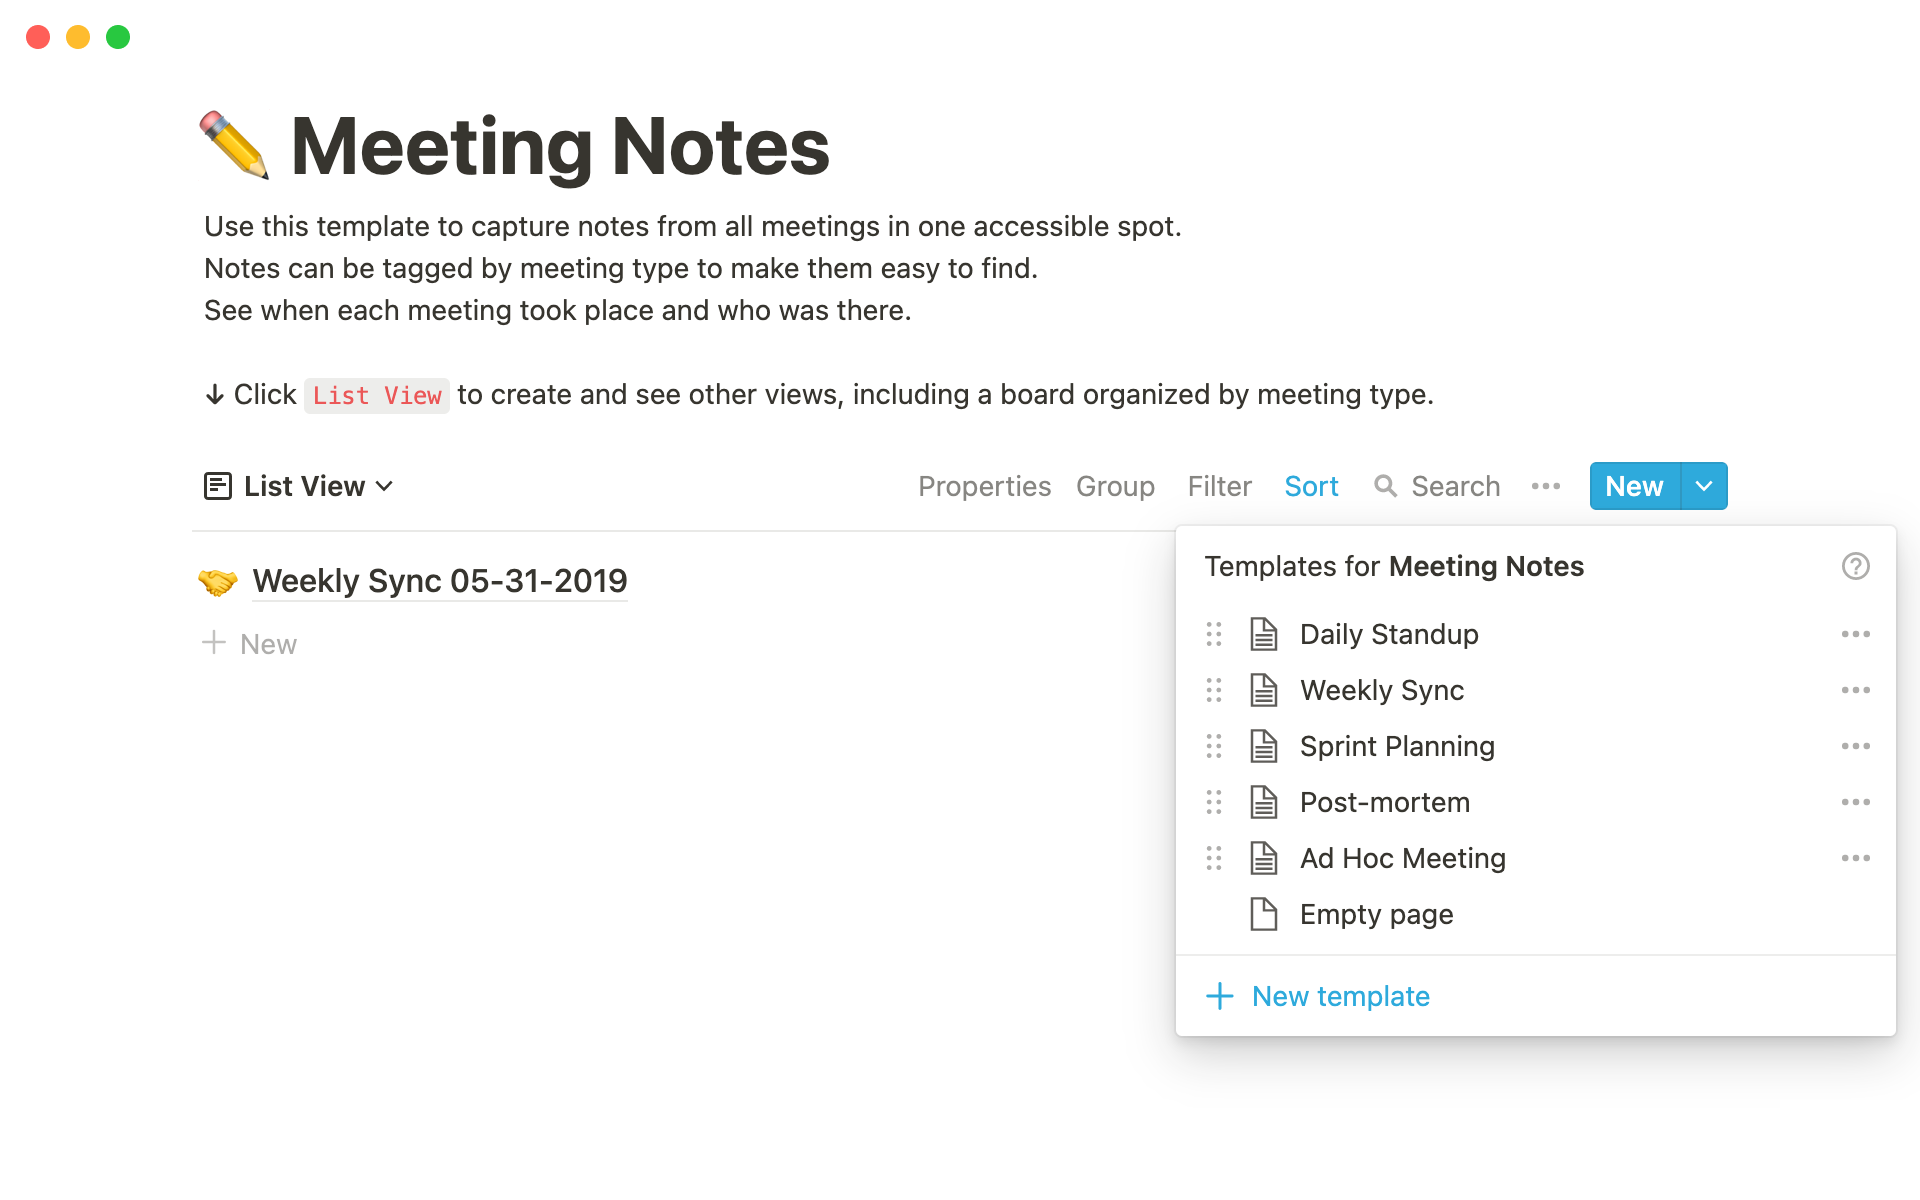 Capture notes from all meetings in one accessible spot.